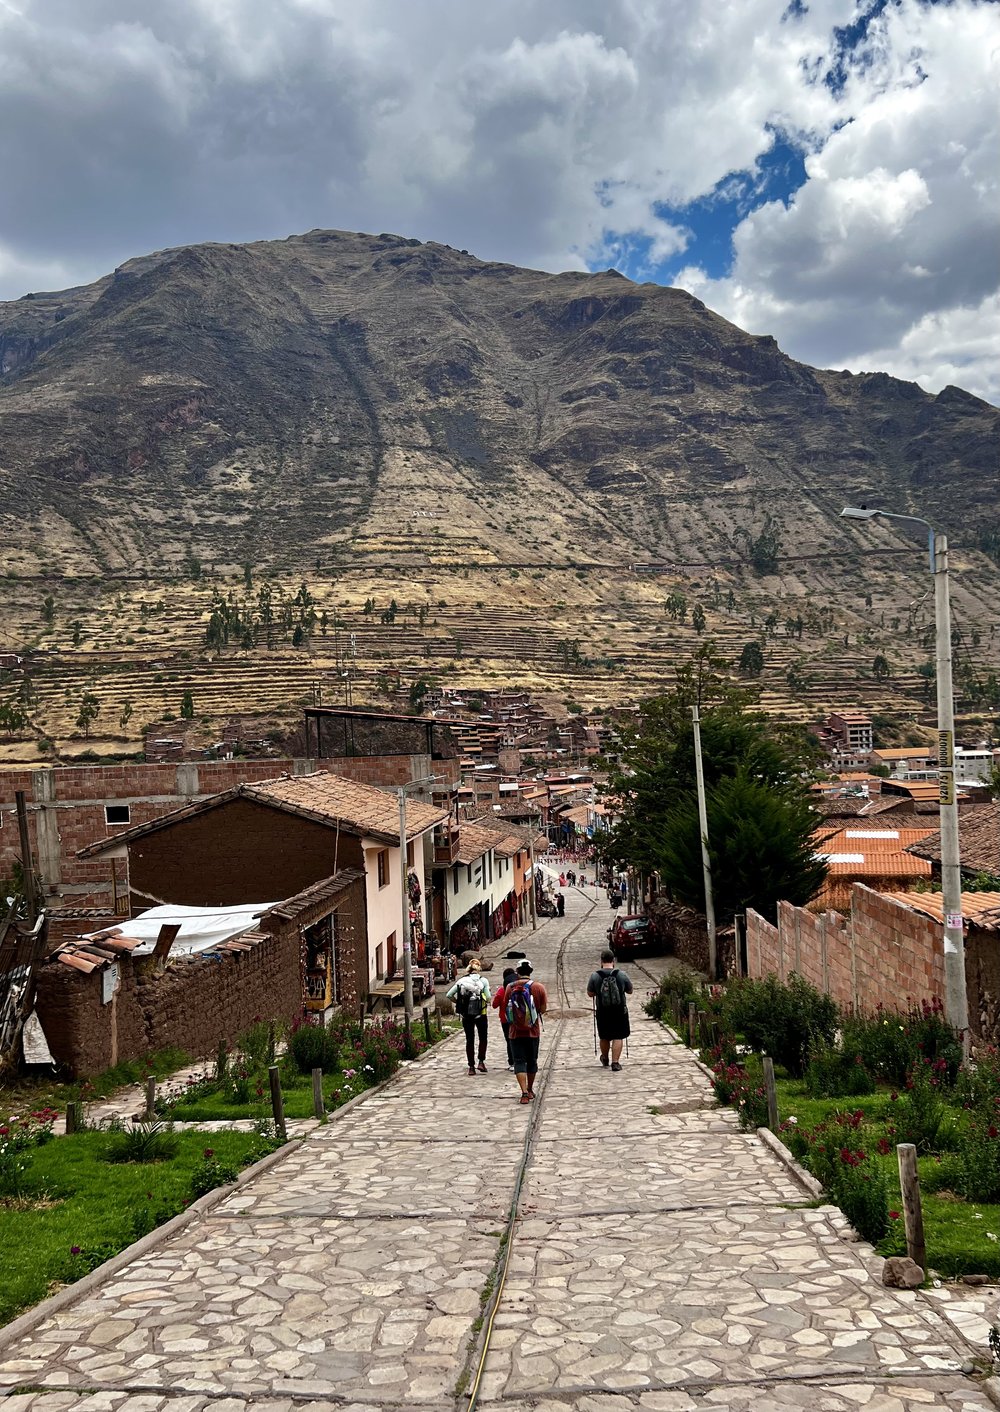 The streets of Pisac